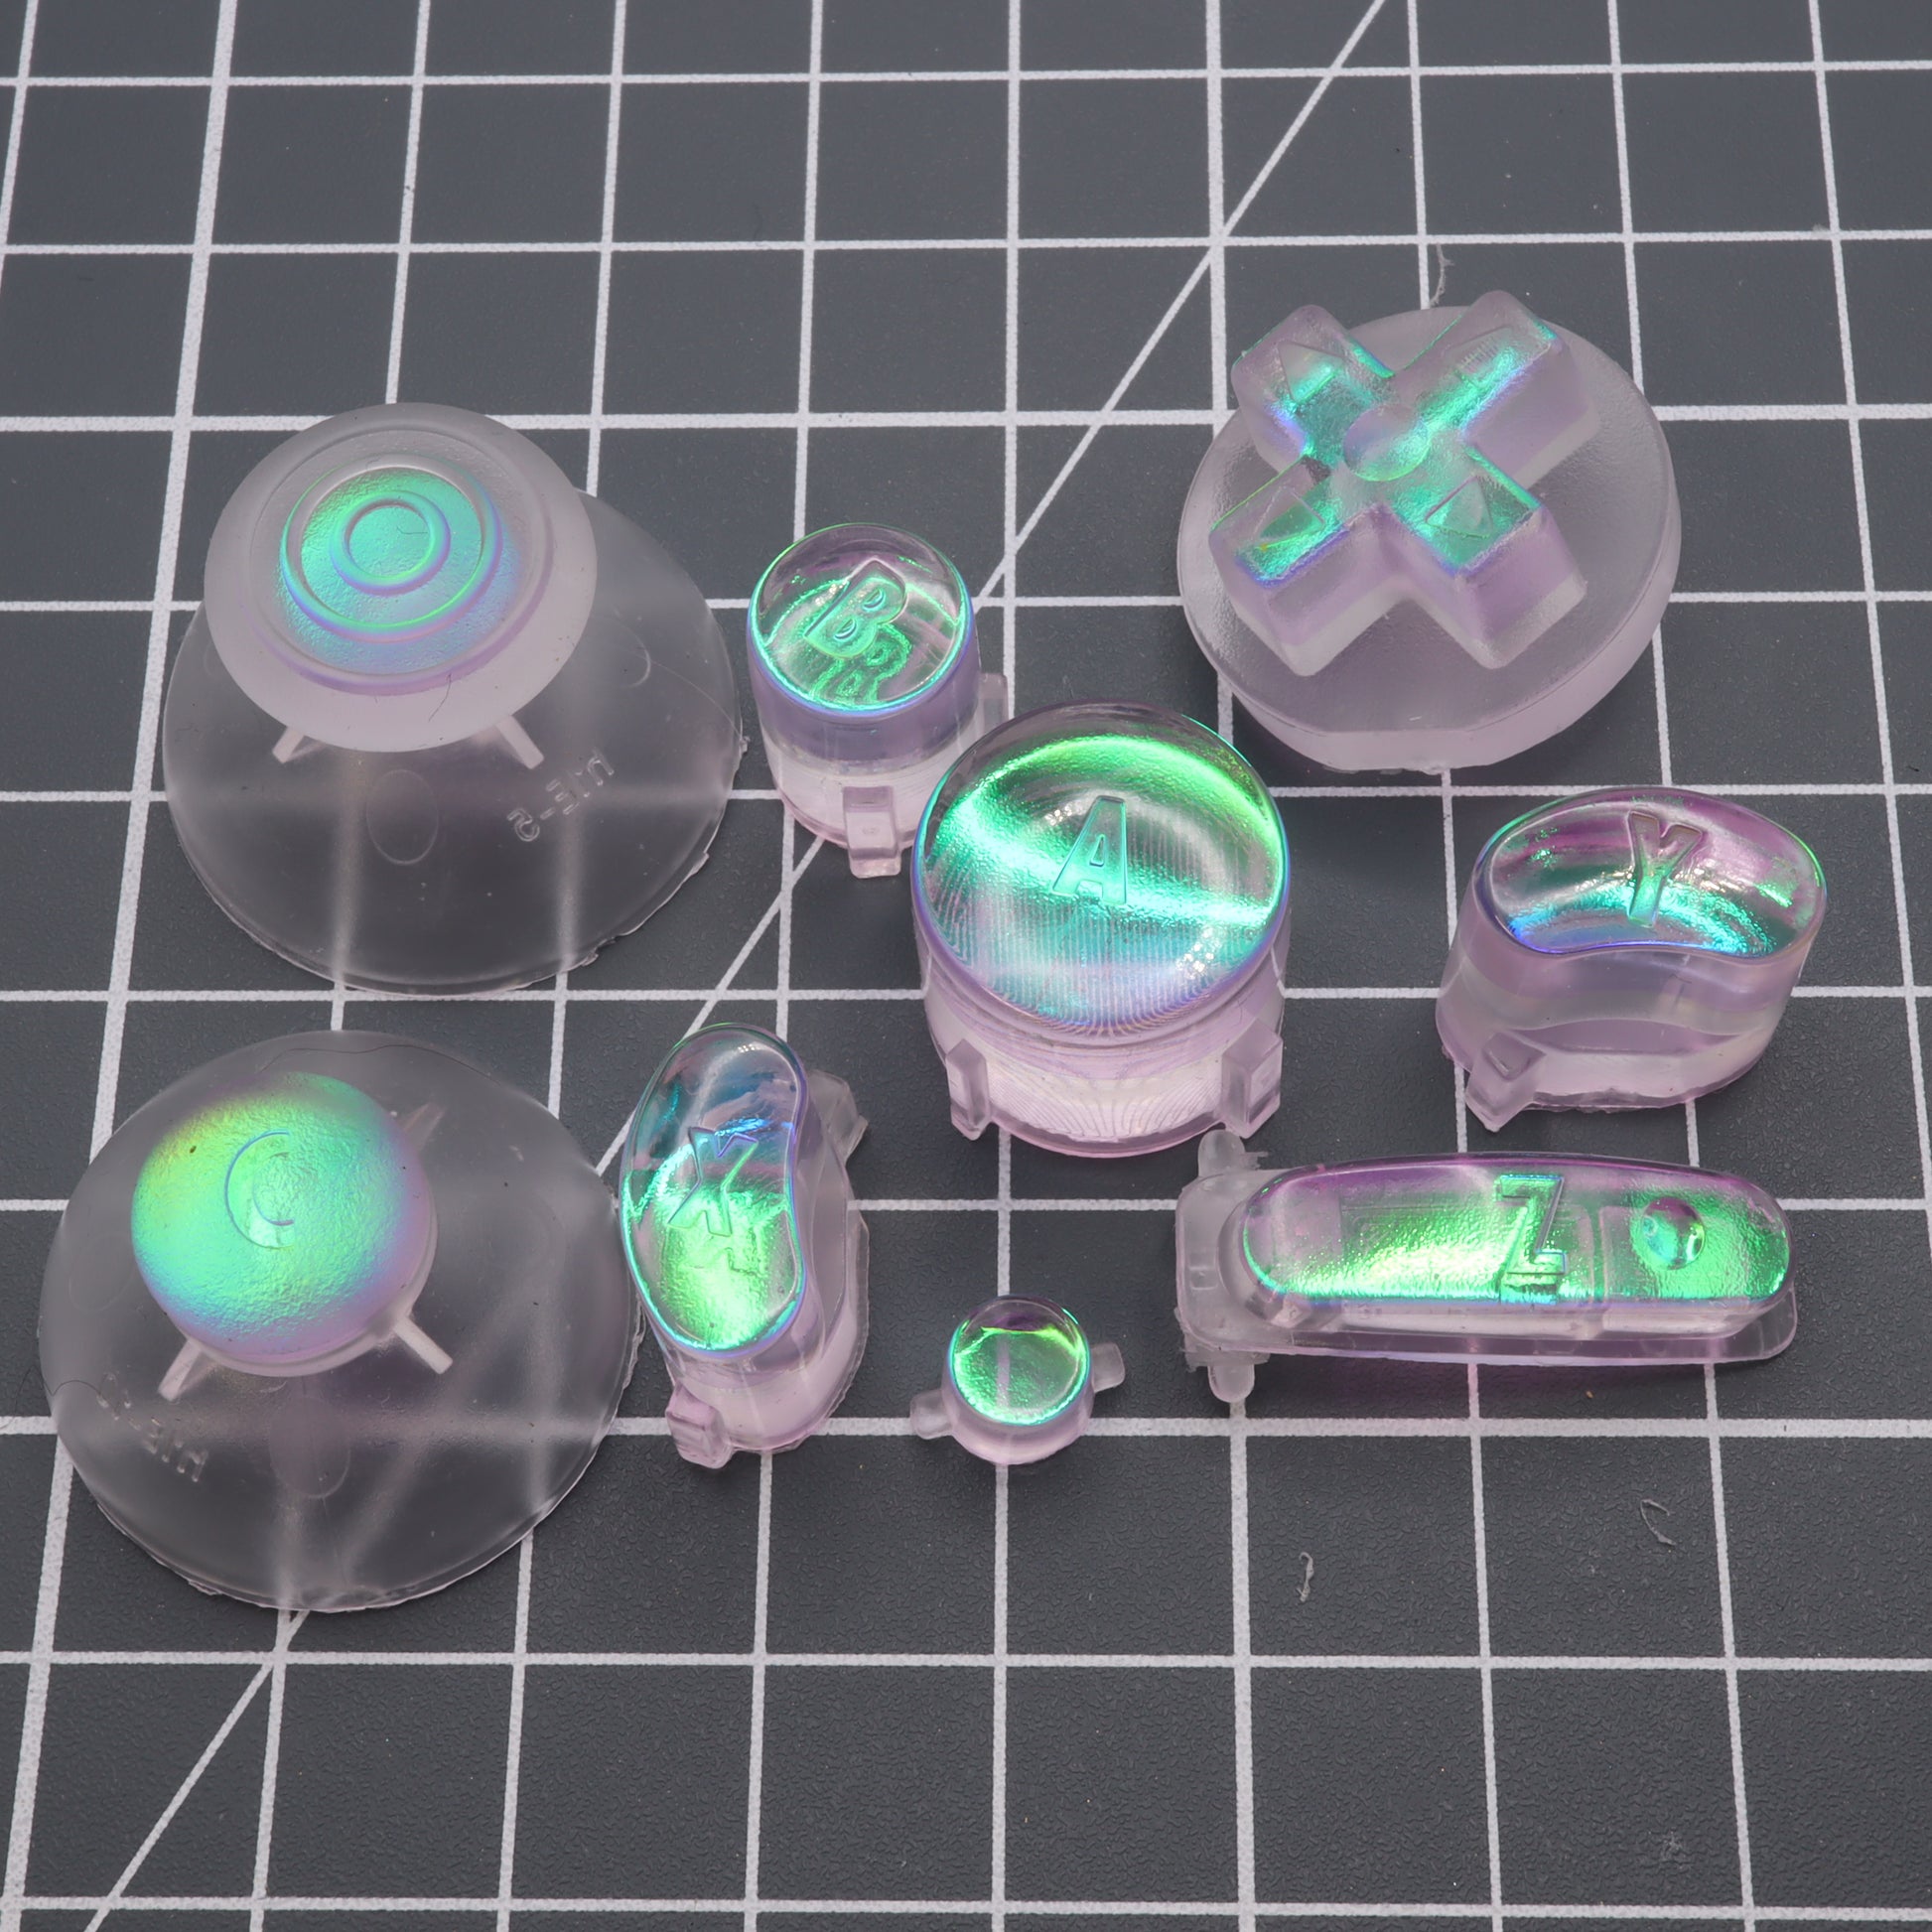 A collection of transparent, colorful mechanical keyboard keycaps with a GameCube - Custom Button - Cool Opal effect.